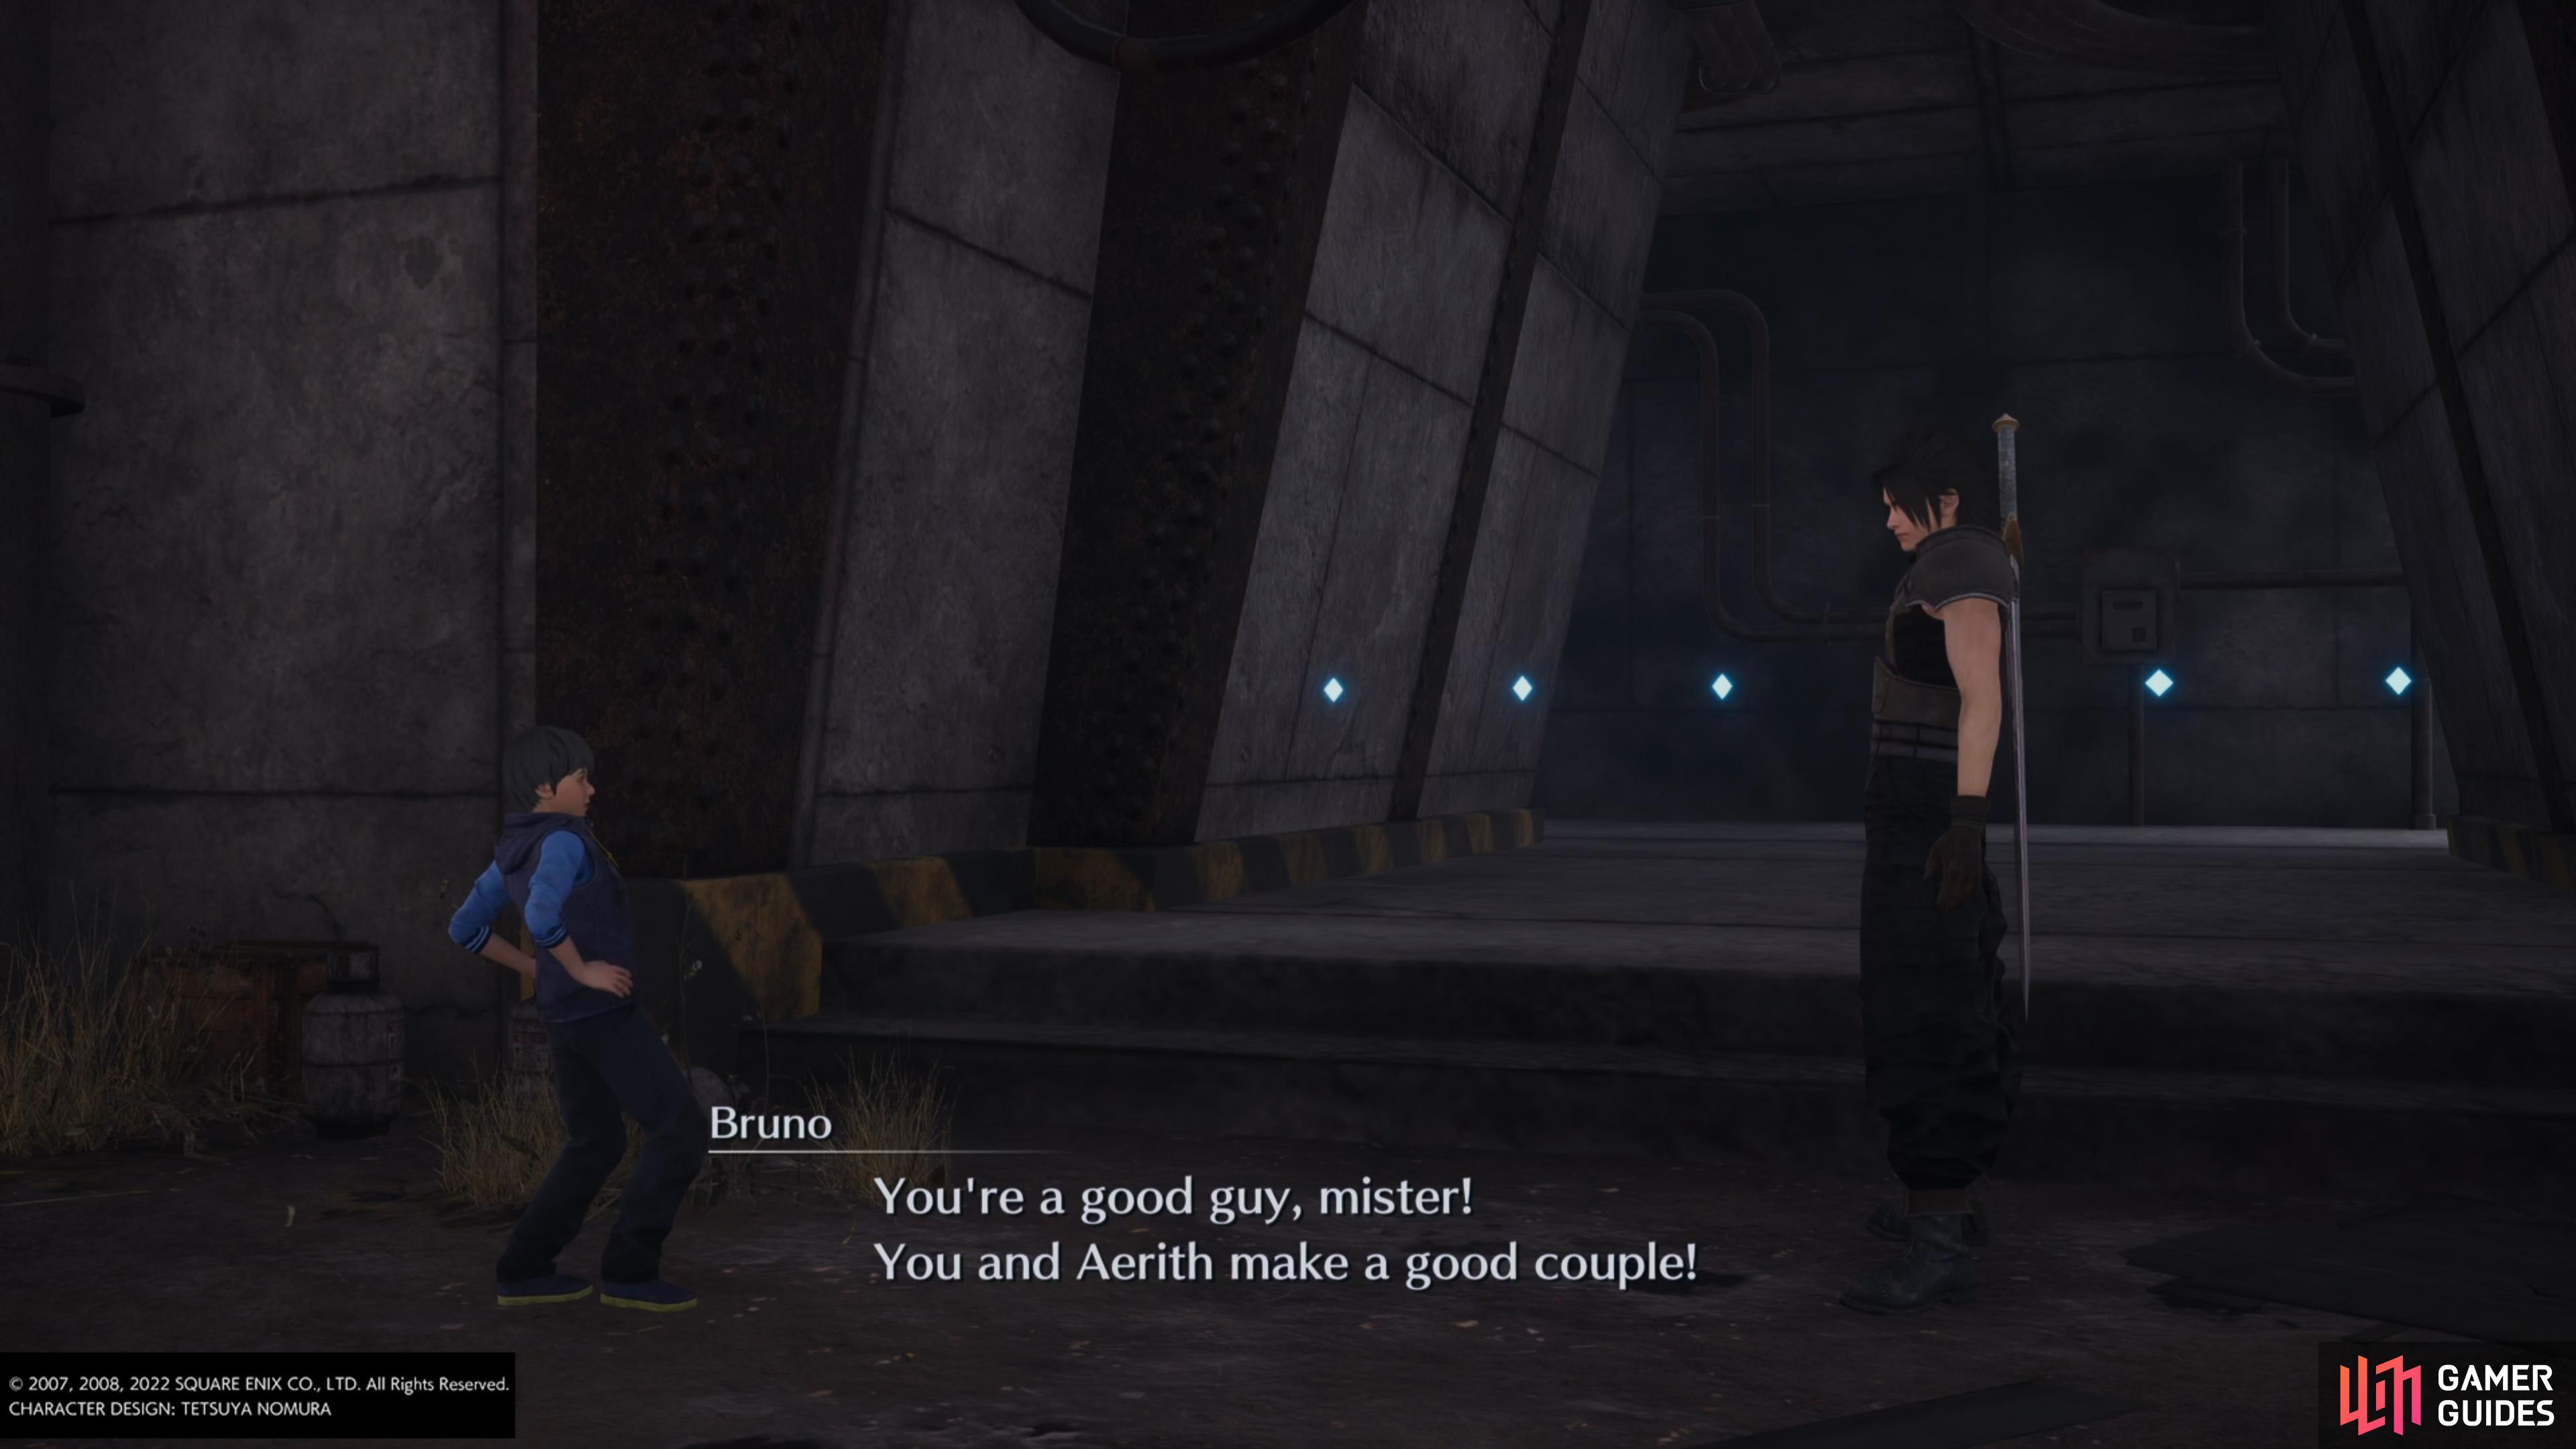 You will get the Trophy if Bruno says you and Aerith make a good couple.